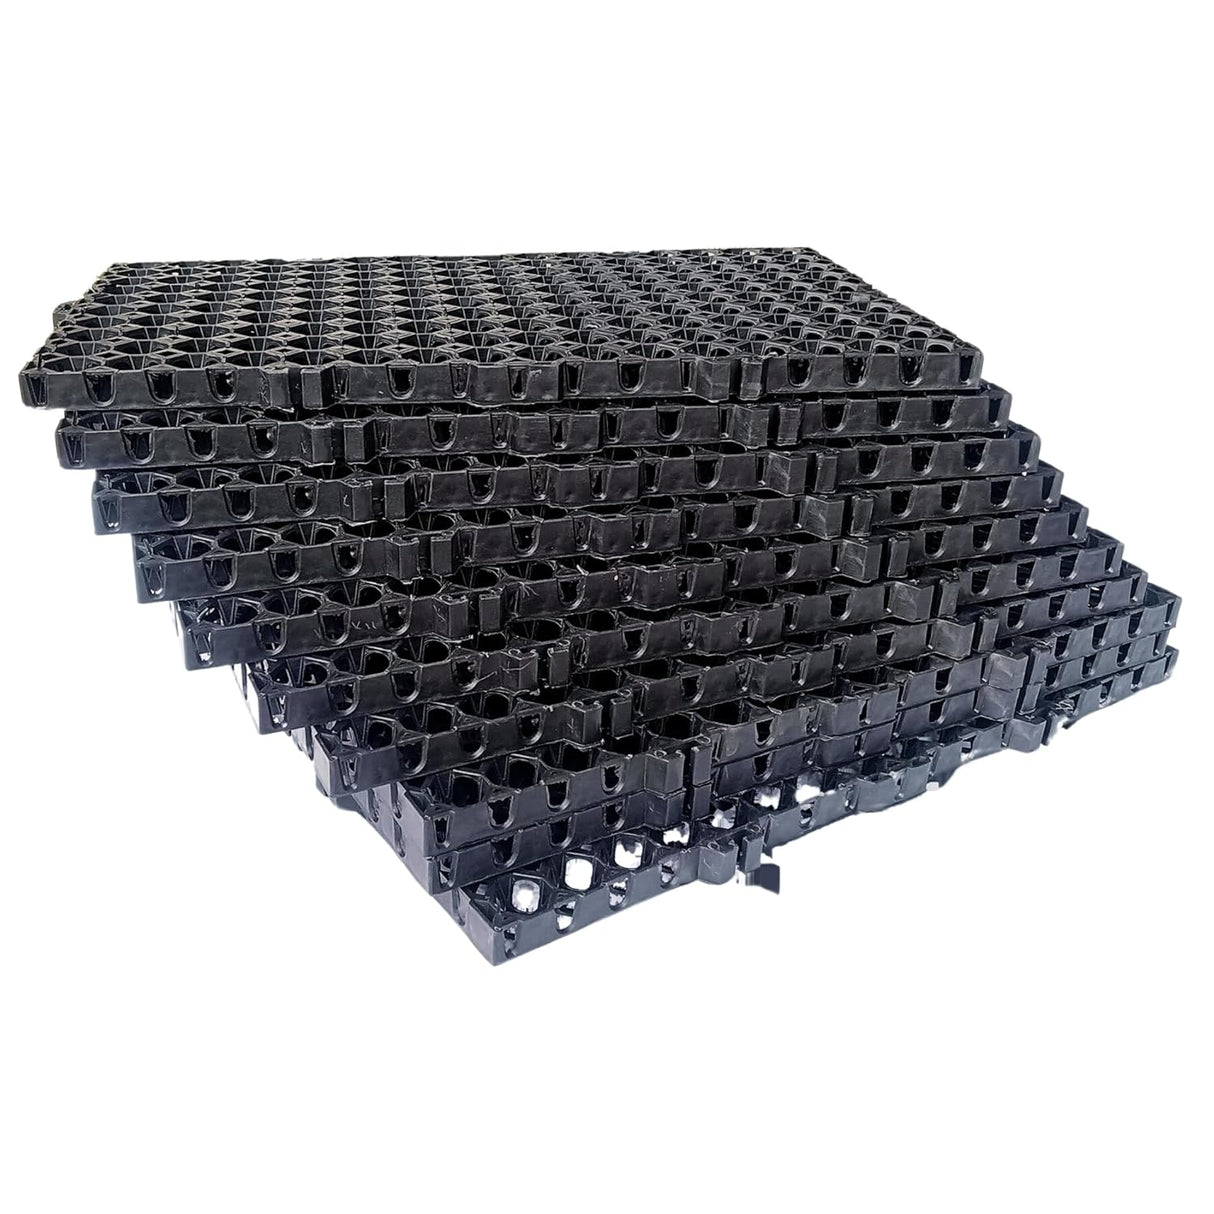 Singhal Garden Drain Cell Polypropylene Drain Cell and 20mm Drainage Mat for Terrace/Kitchen Garden (Black, 500 x 250 x 20) Pack of 5